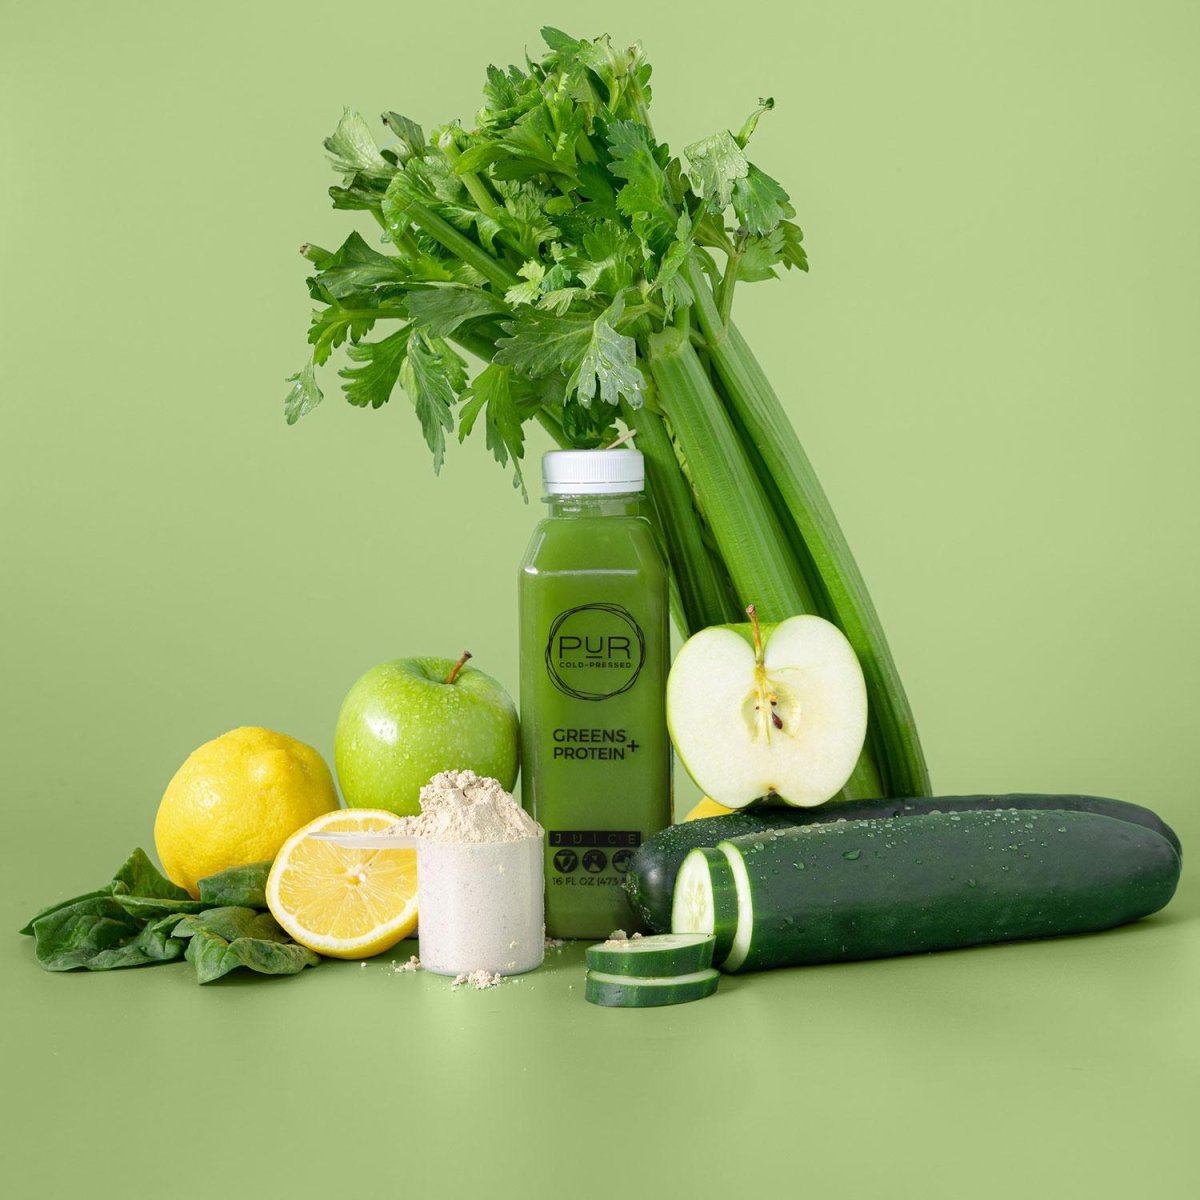 GREENS + PROTEIN COLD PRESSED JUICE - PUR Cold Pressed Juice - Individual Juice - Juice - Protein - Individual Juice